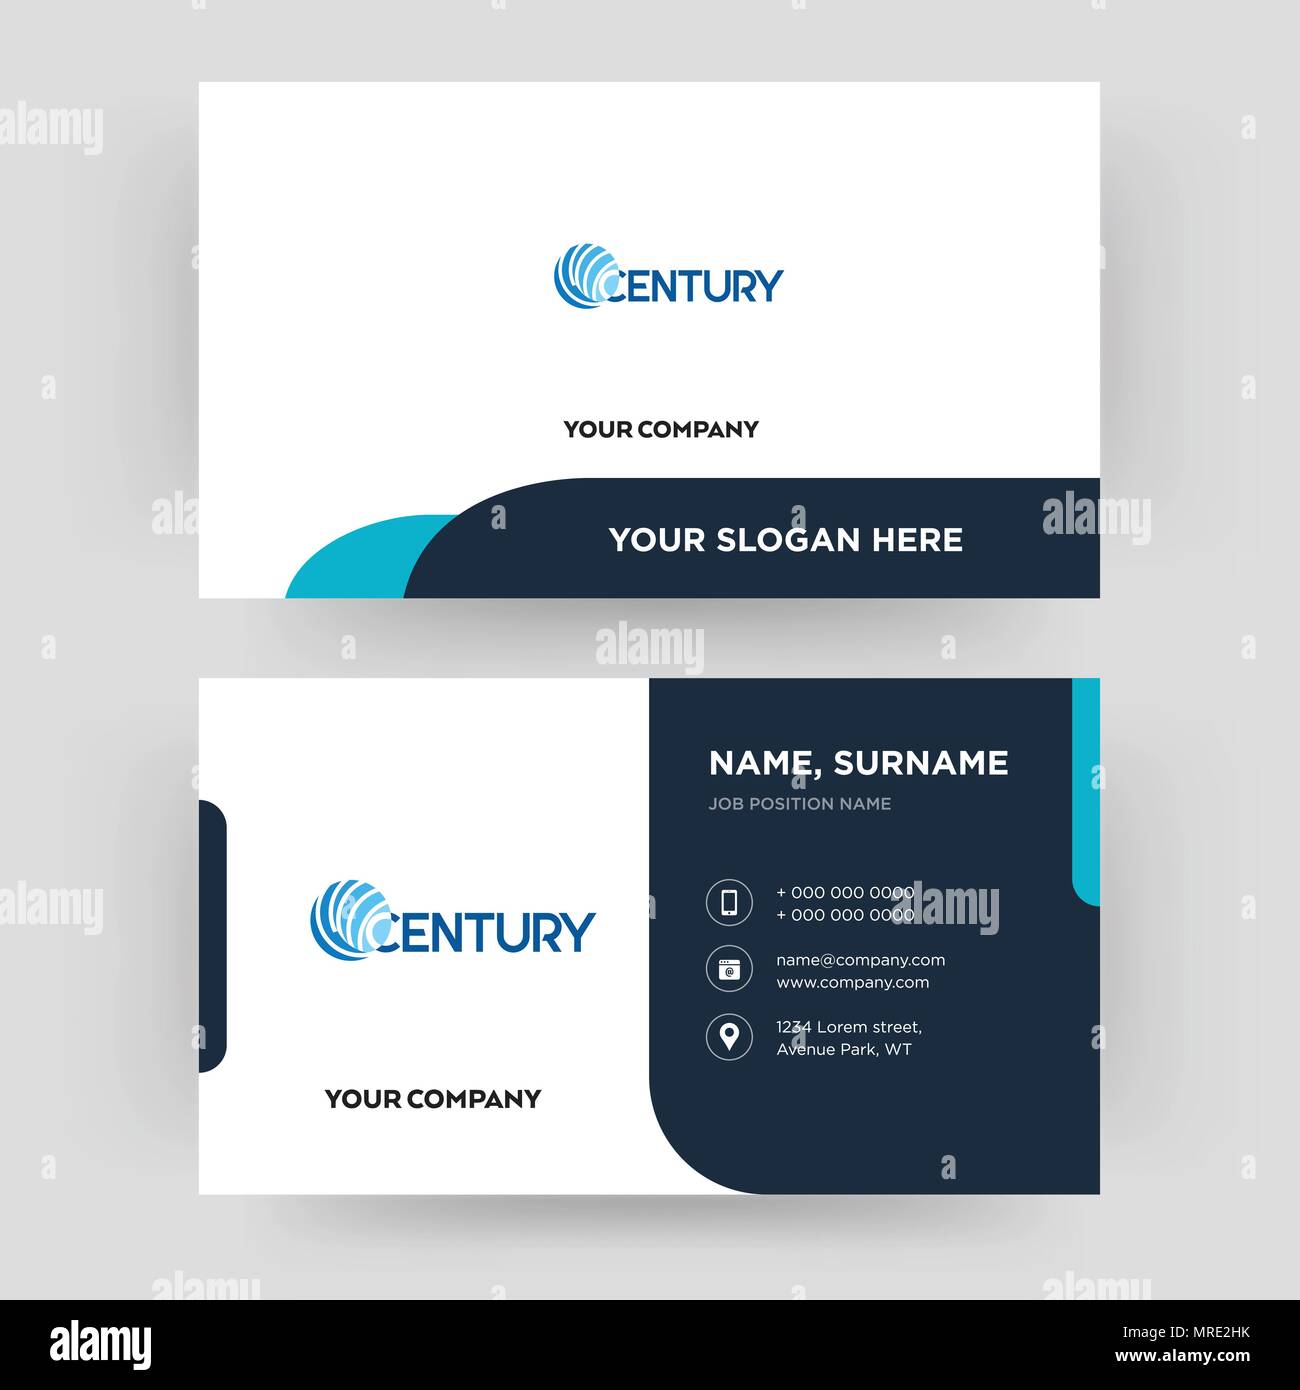 century, business card design template, Visiting for your company, Modern Creative and Clean identity Card Vector Stock Vector